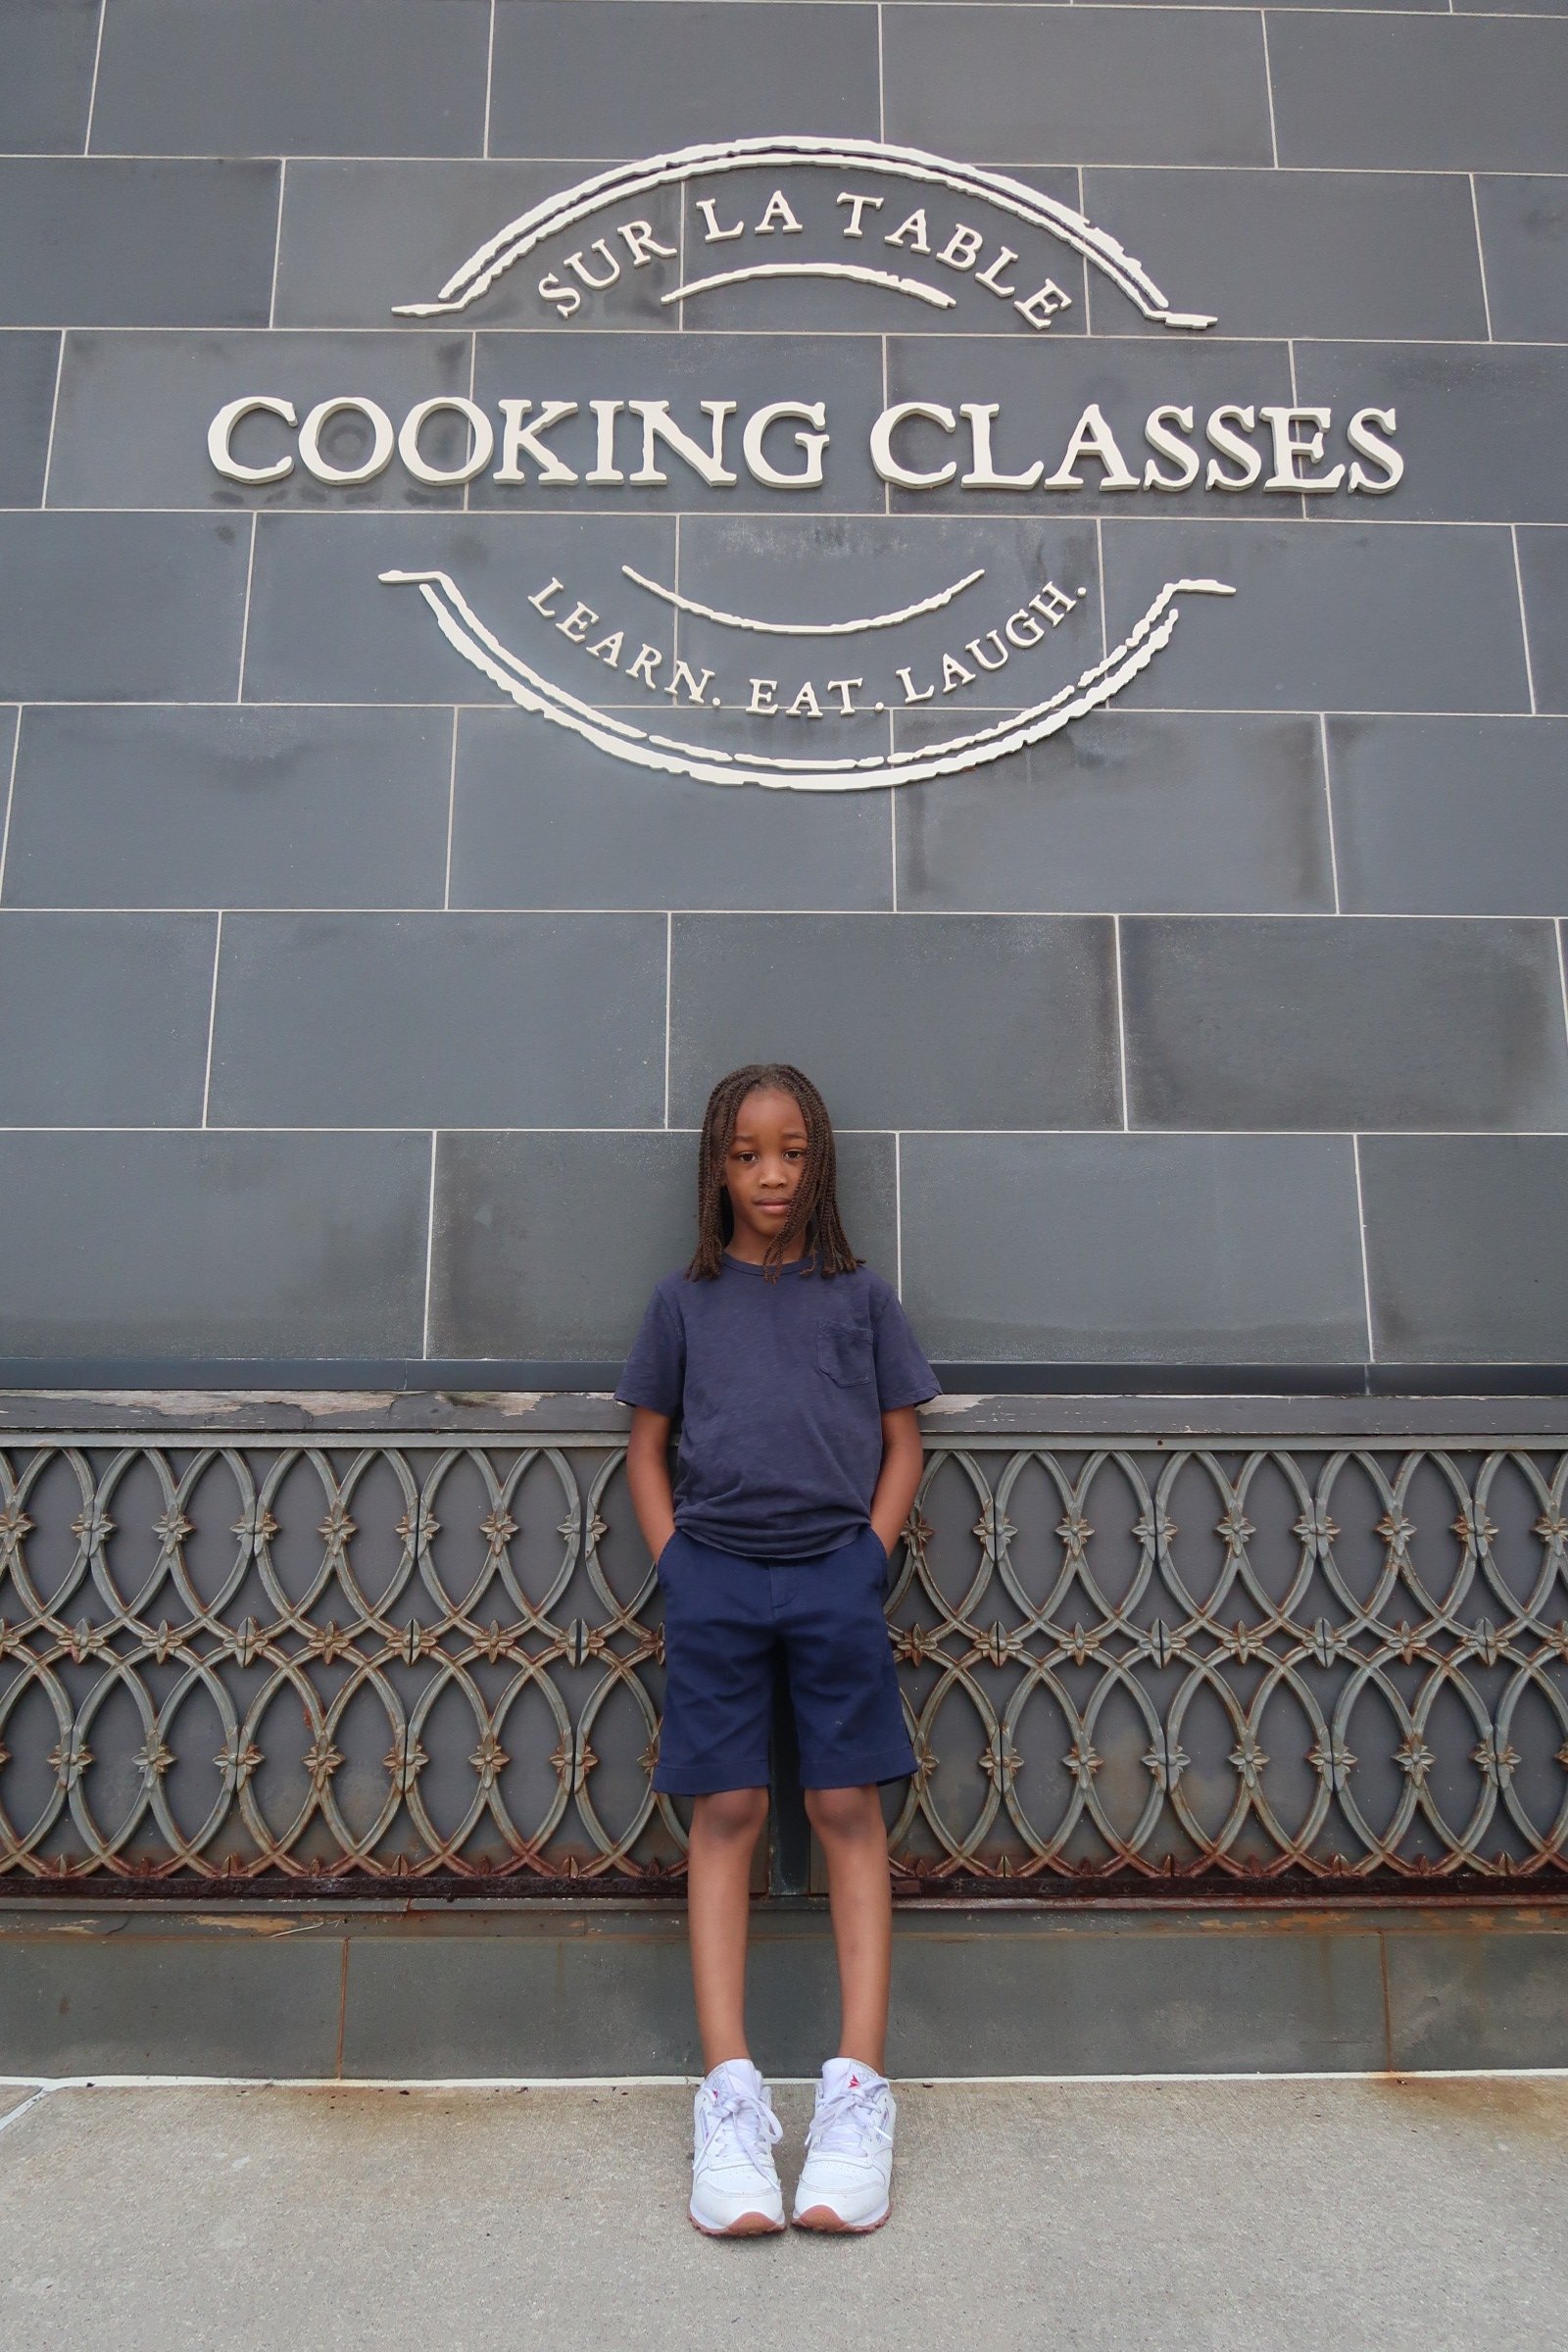 Snapshot of motherhood: onward to second grade, dinosaurs (dinosaurs and dinosaurs), and being a chef with a blue BMW